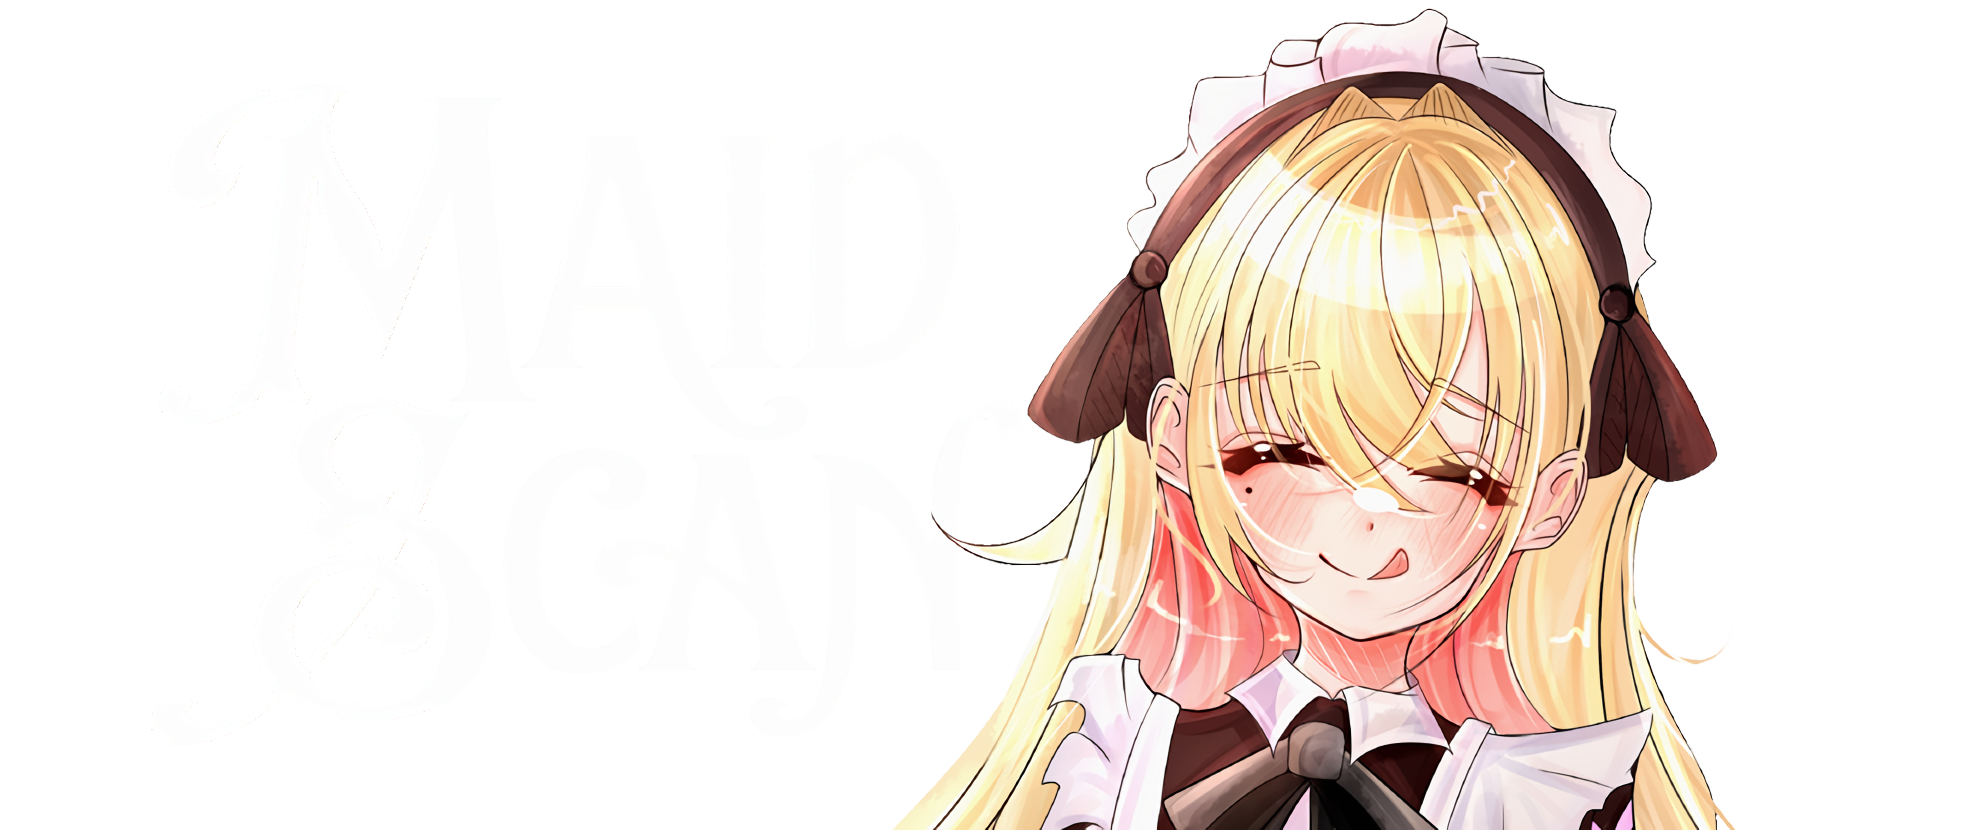 Maid Scan